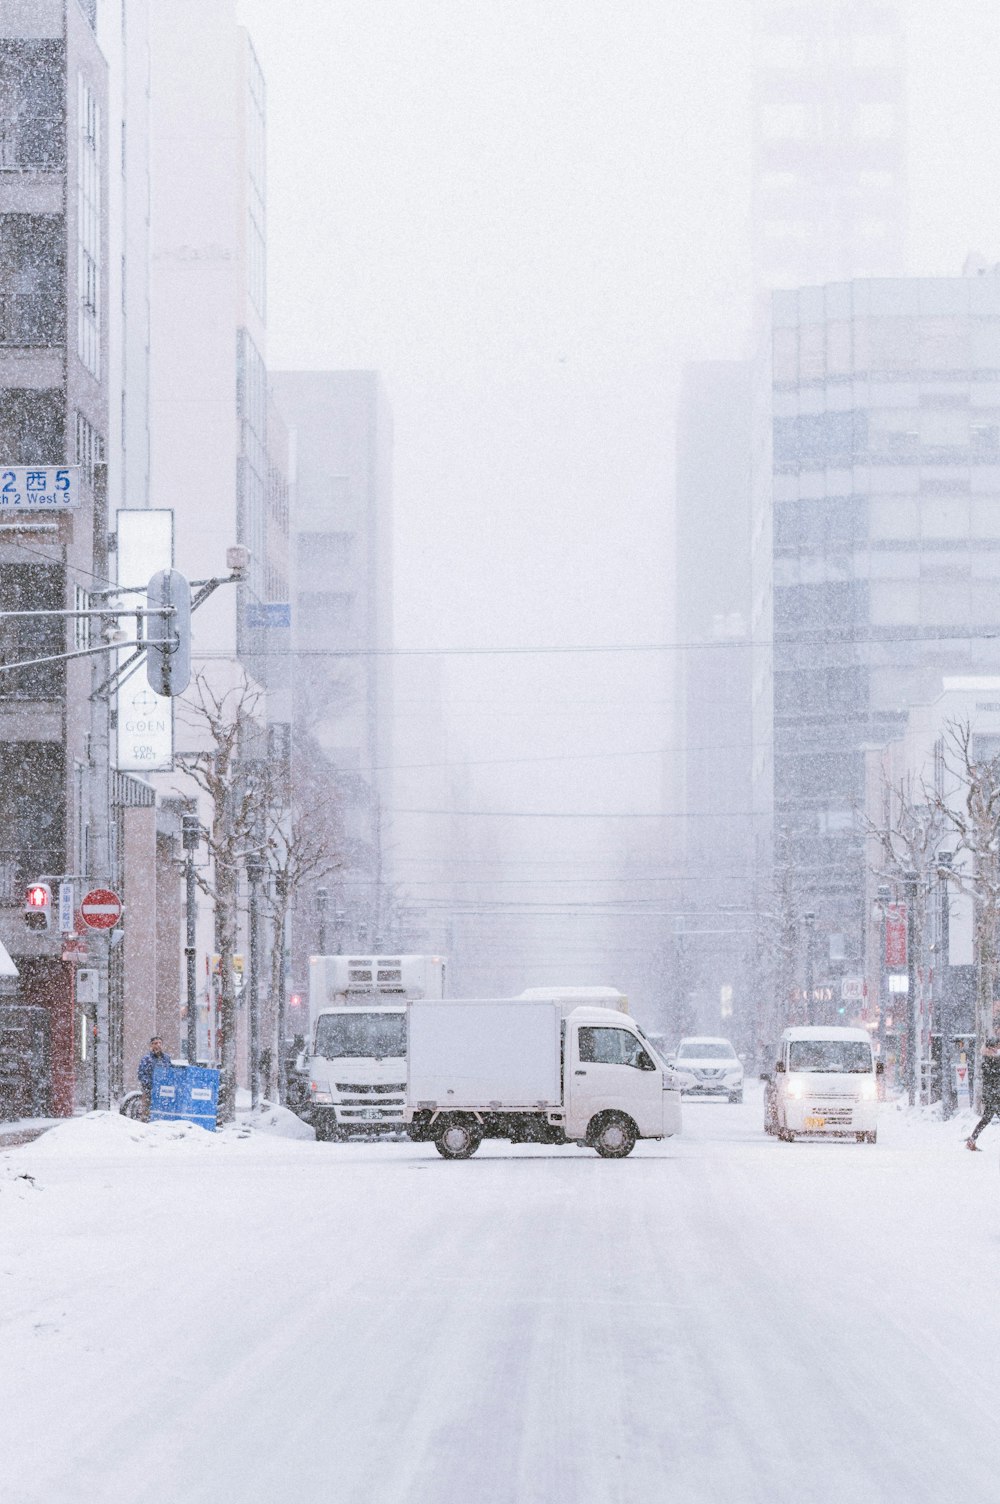 a snowy city street with cars and trucks